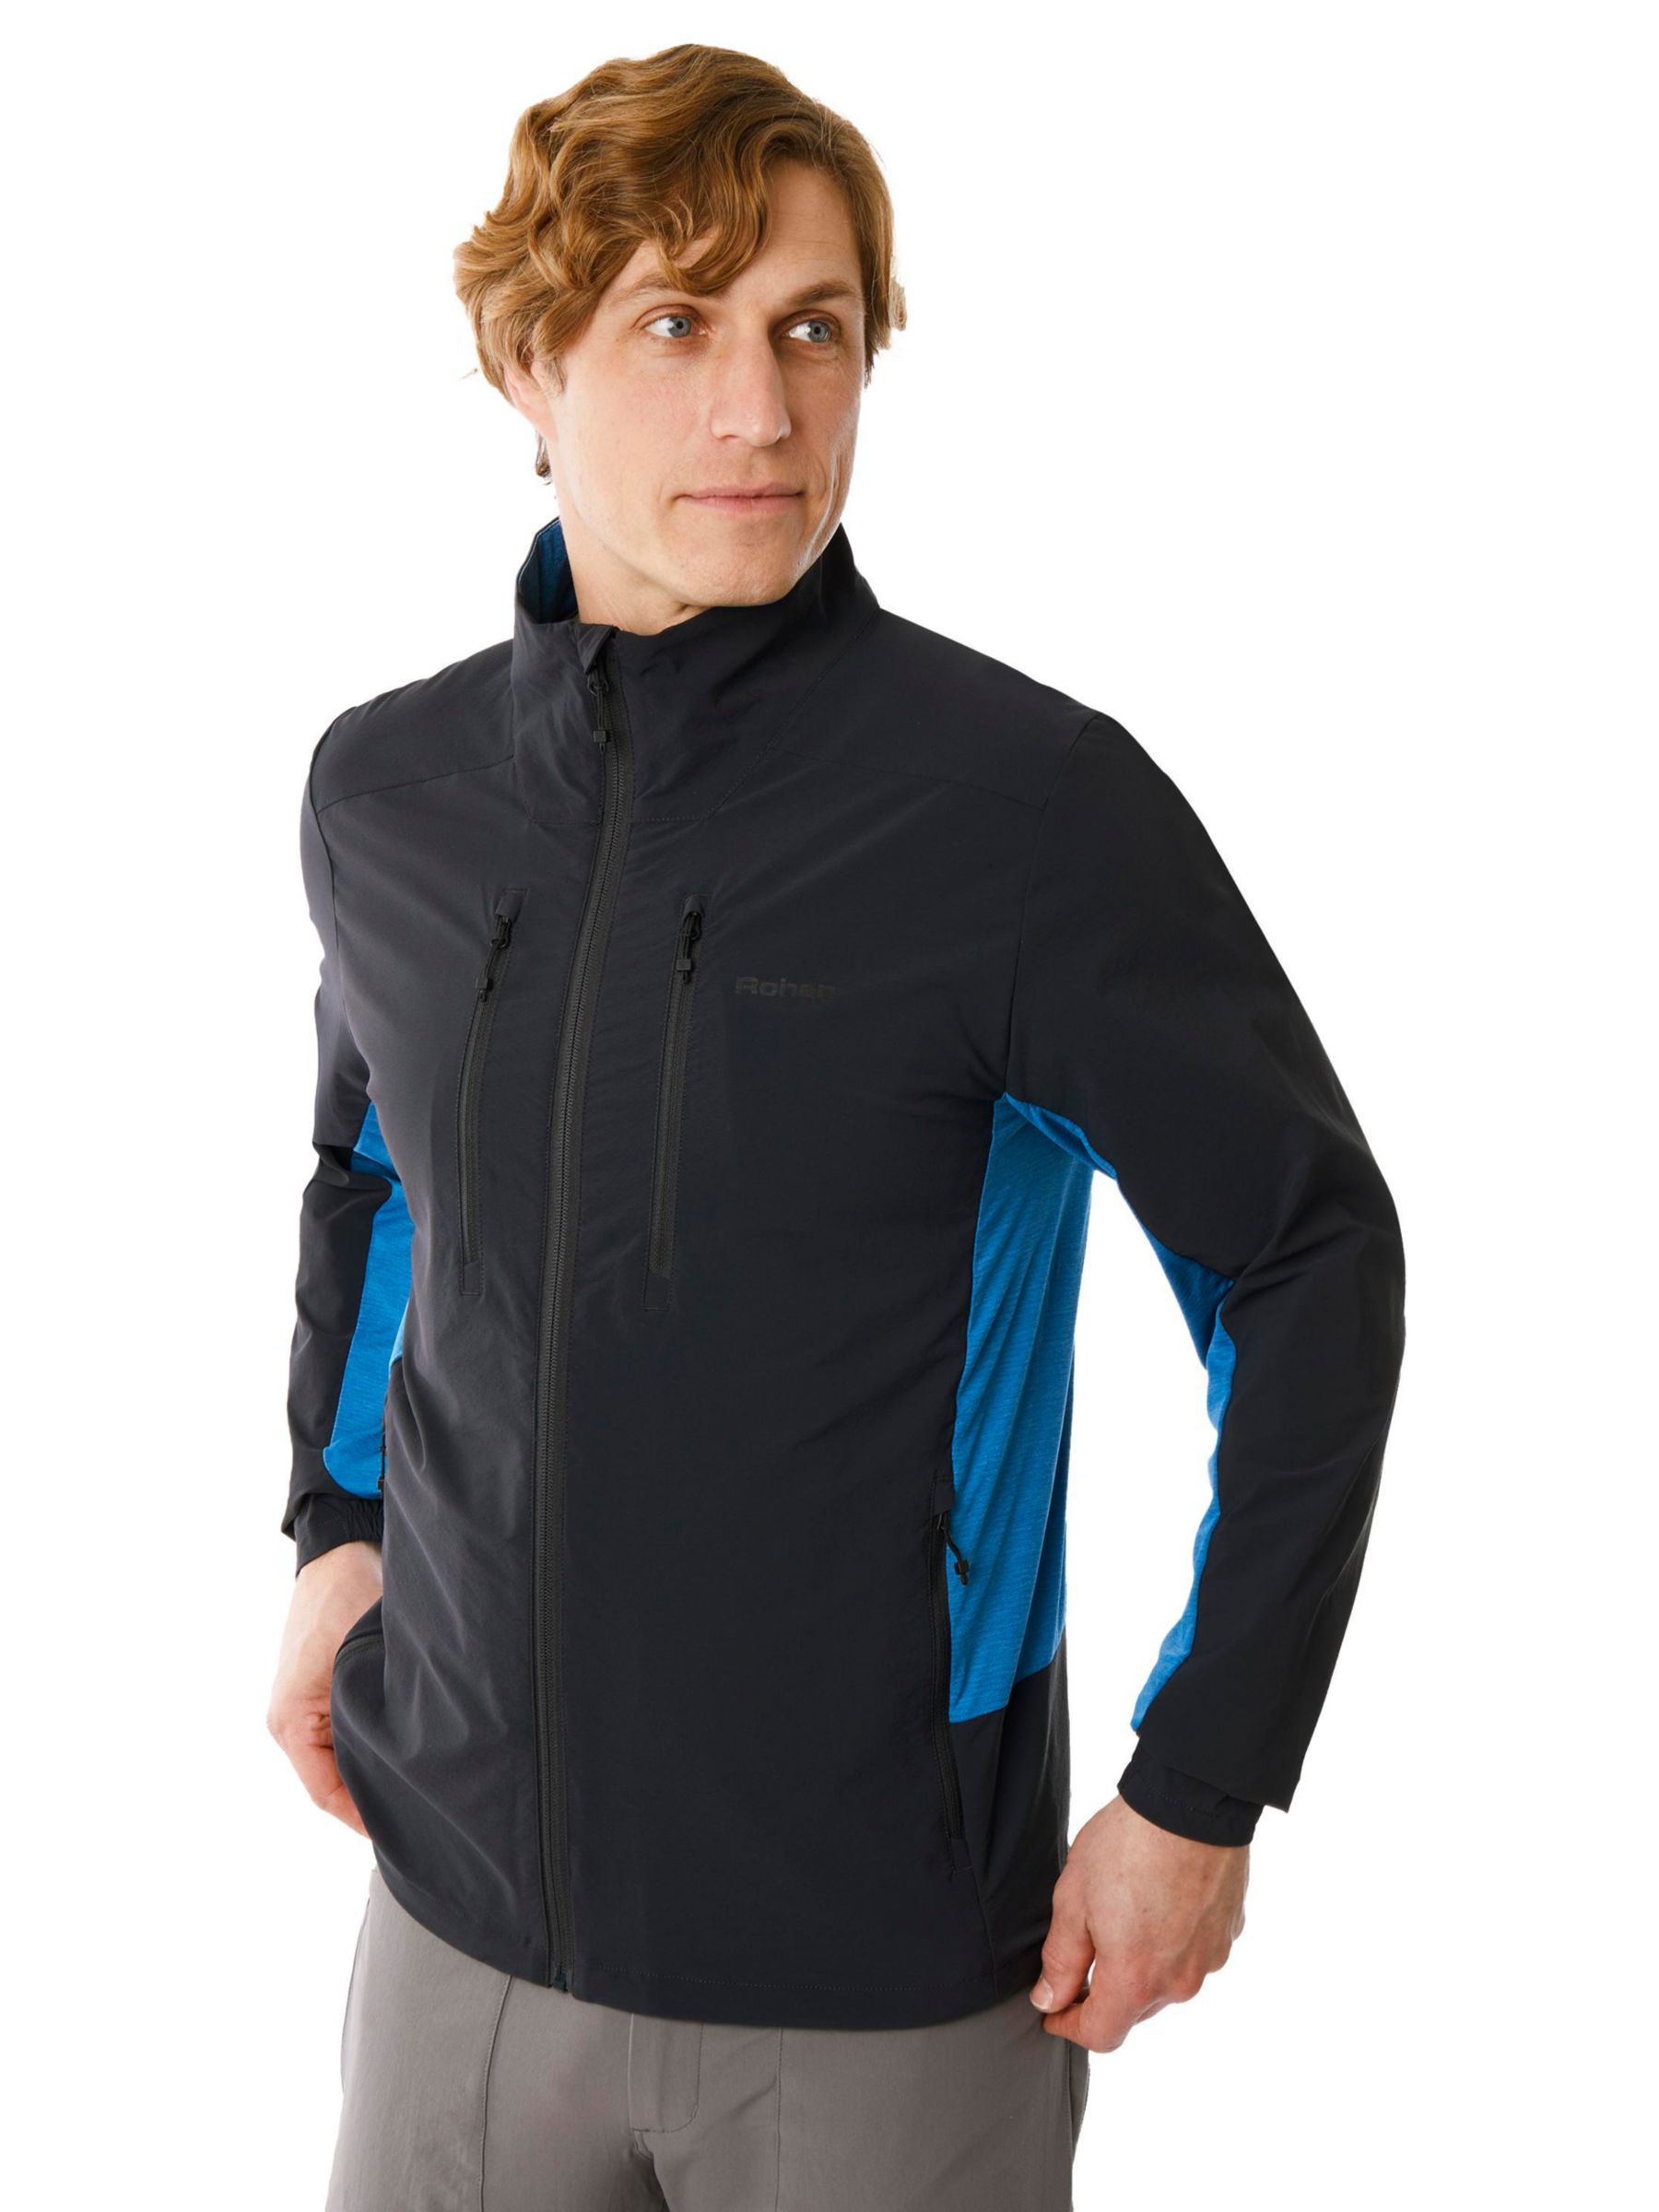 Rohan Fjell Vapour Stretch Jacket, True Navy/Electric Blue, S